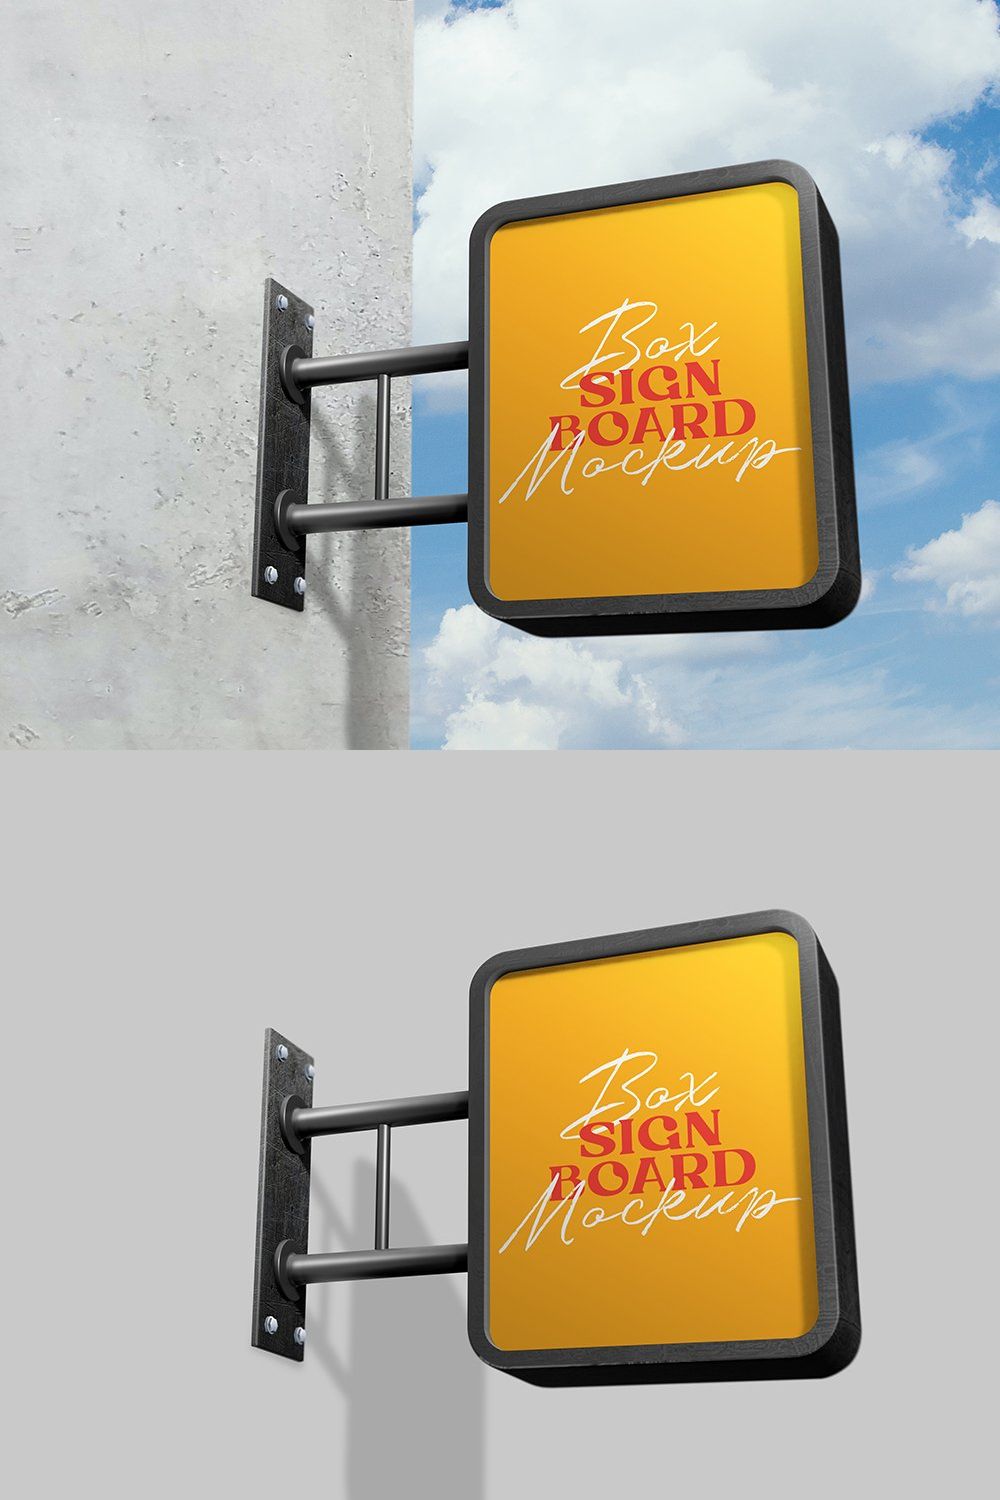 Box Signboard - Mockups pinterest preview image.